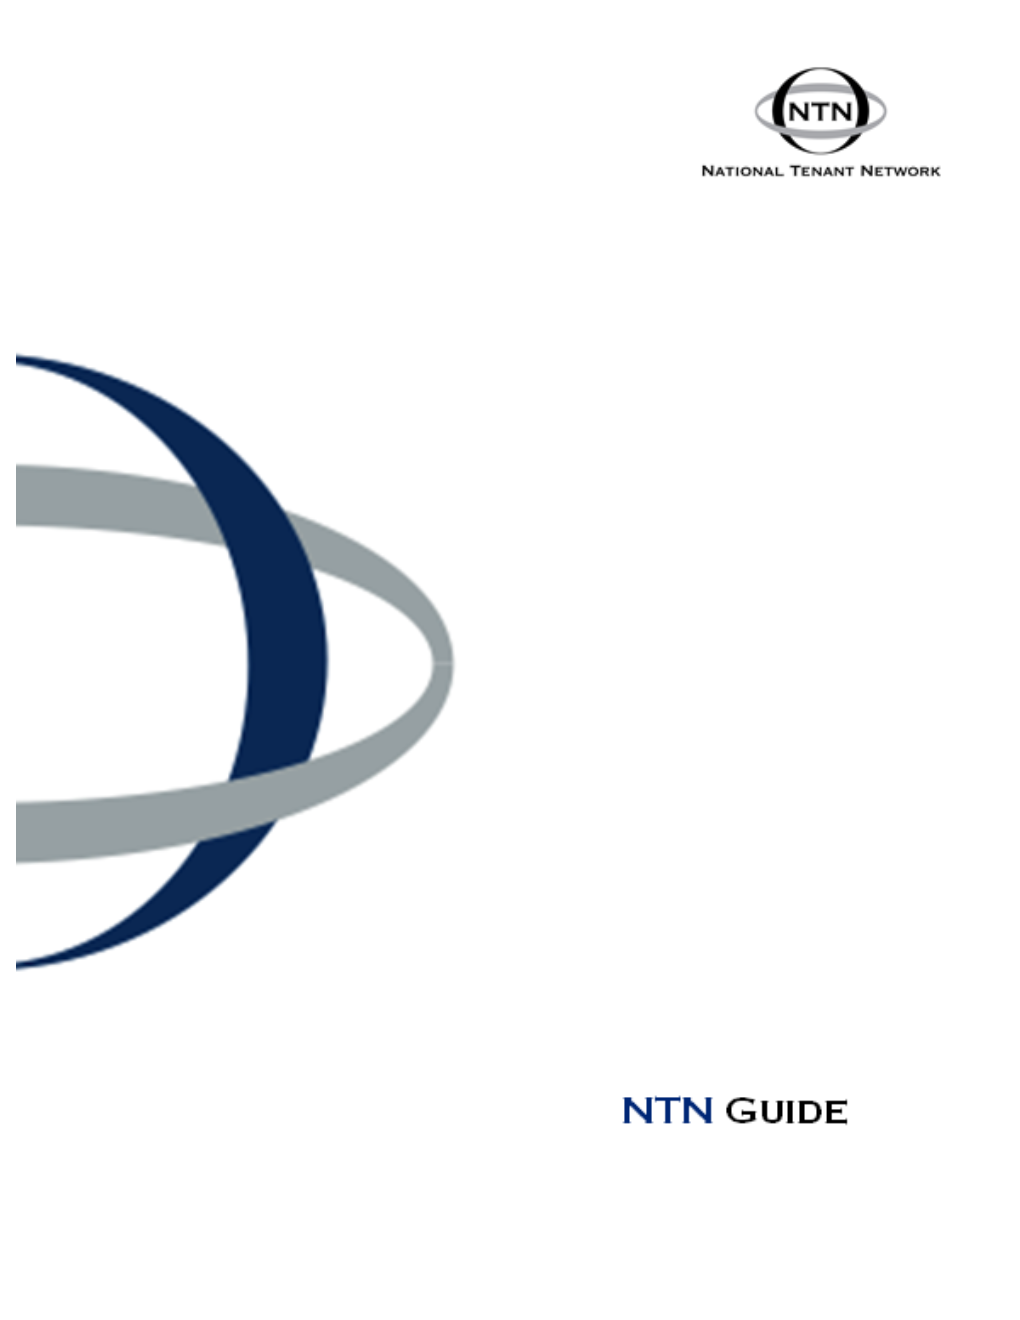 A Guide to Ntn Services